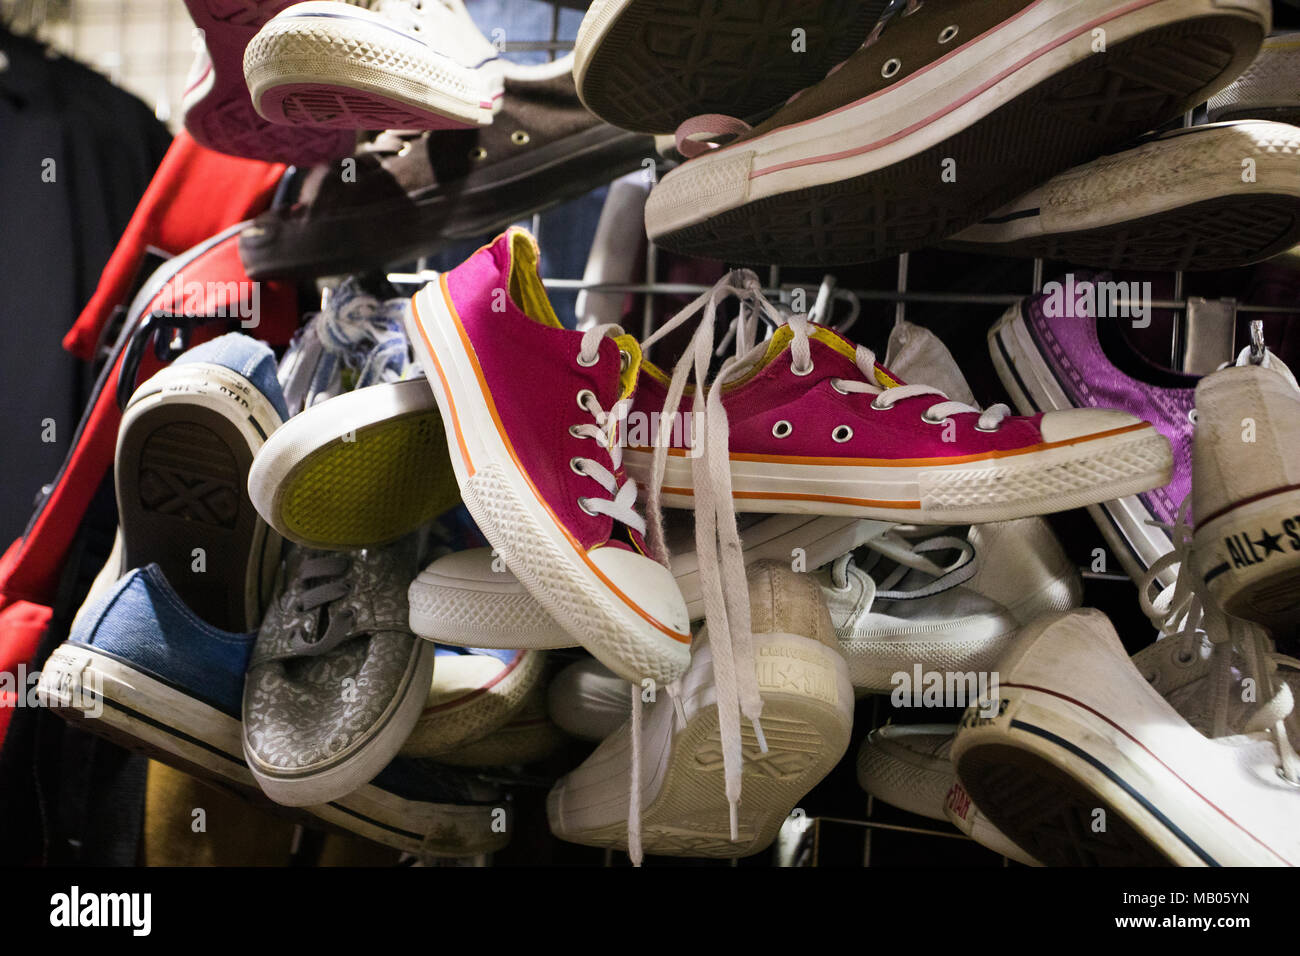 Vintage shopping in London - baseball boots. Stock Photo